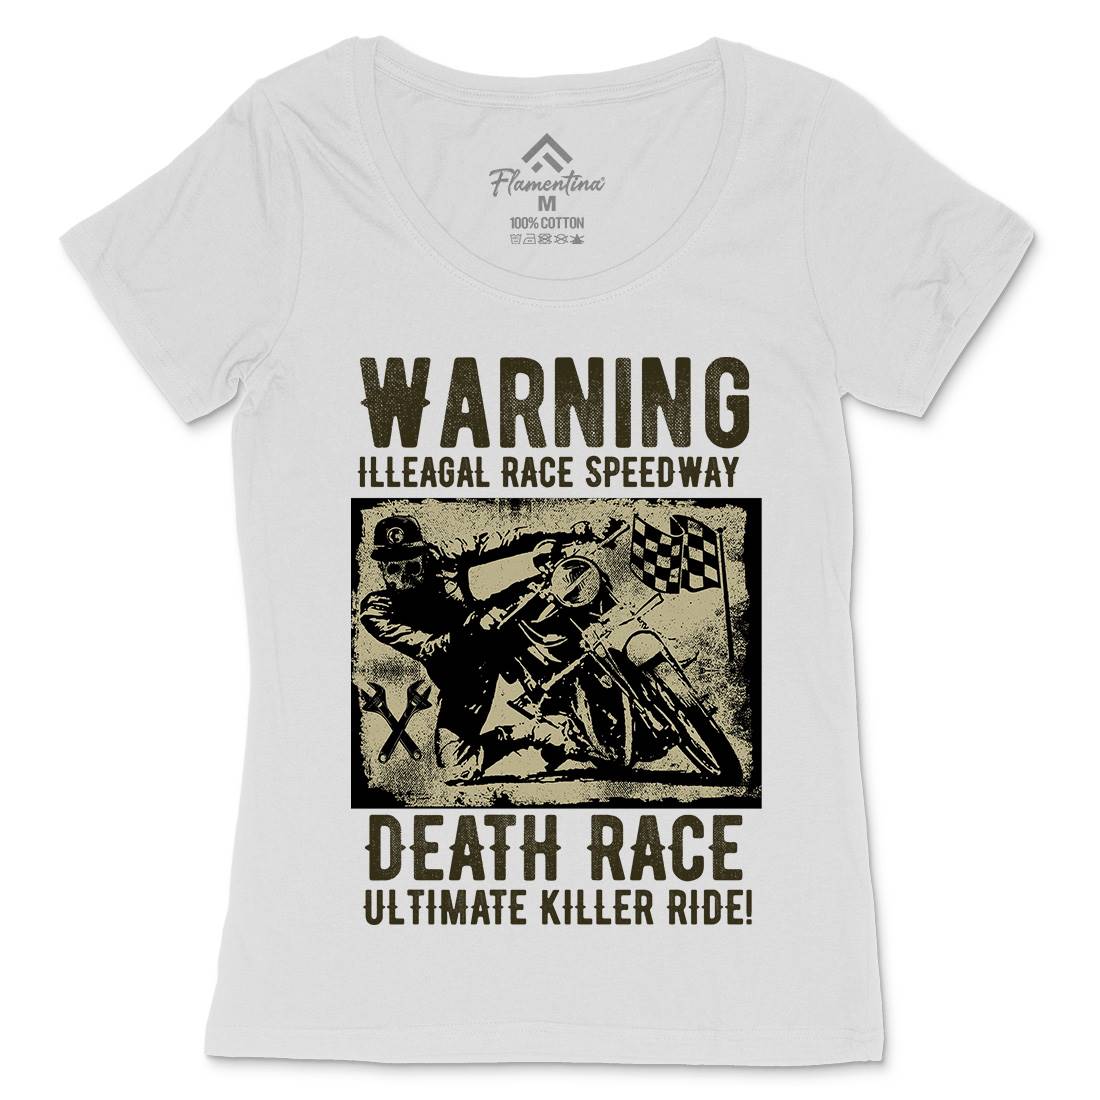 Illegal Race Speedway Womens Scoop Neck T-Shirt Motorcycles C951